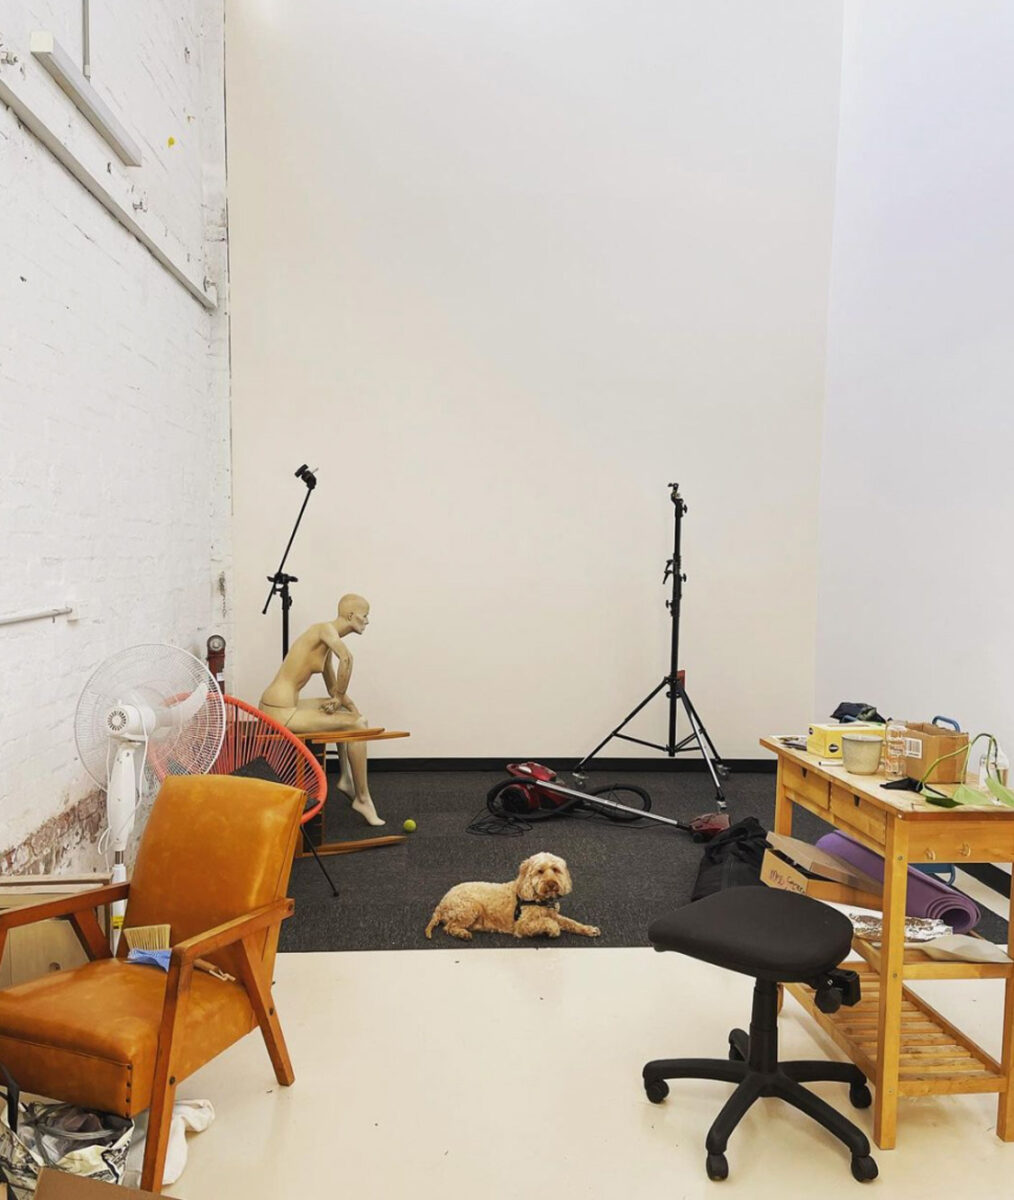 A photo of a studio with a dog.